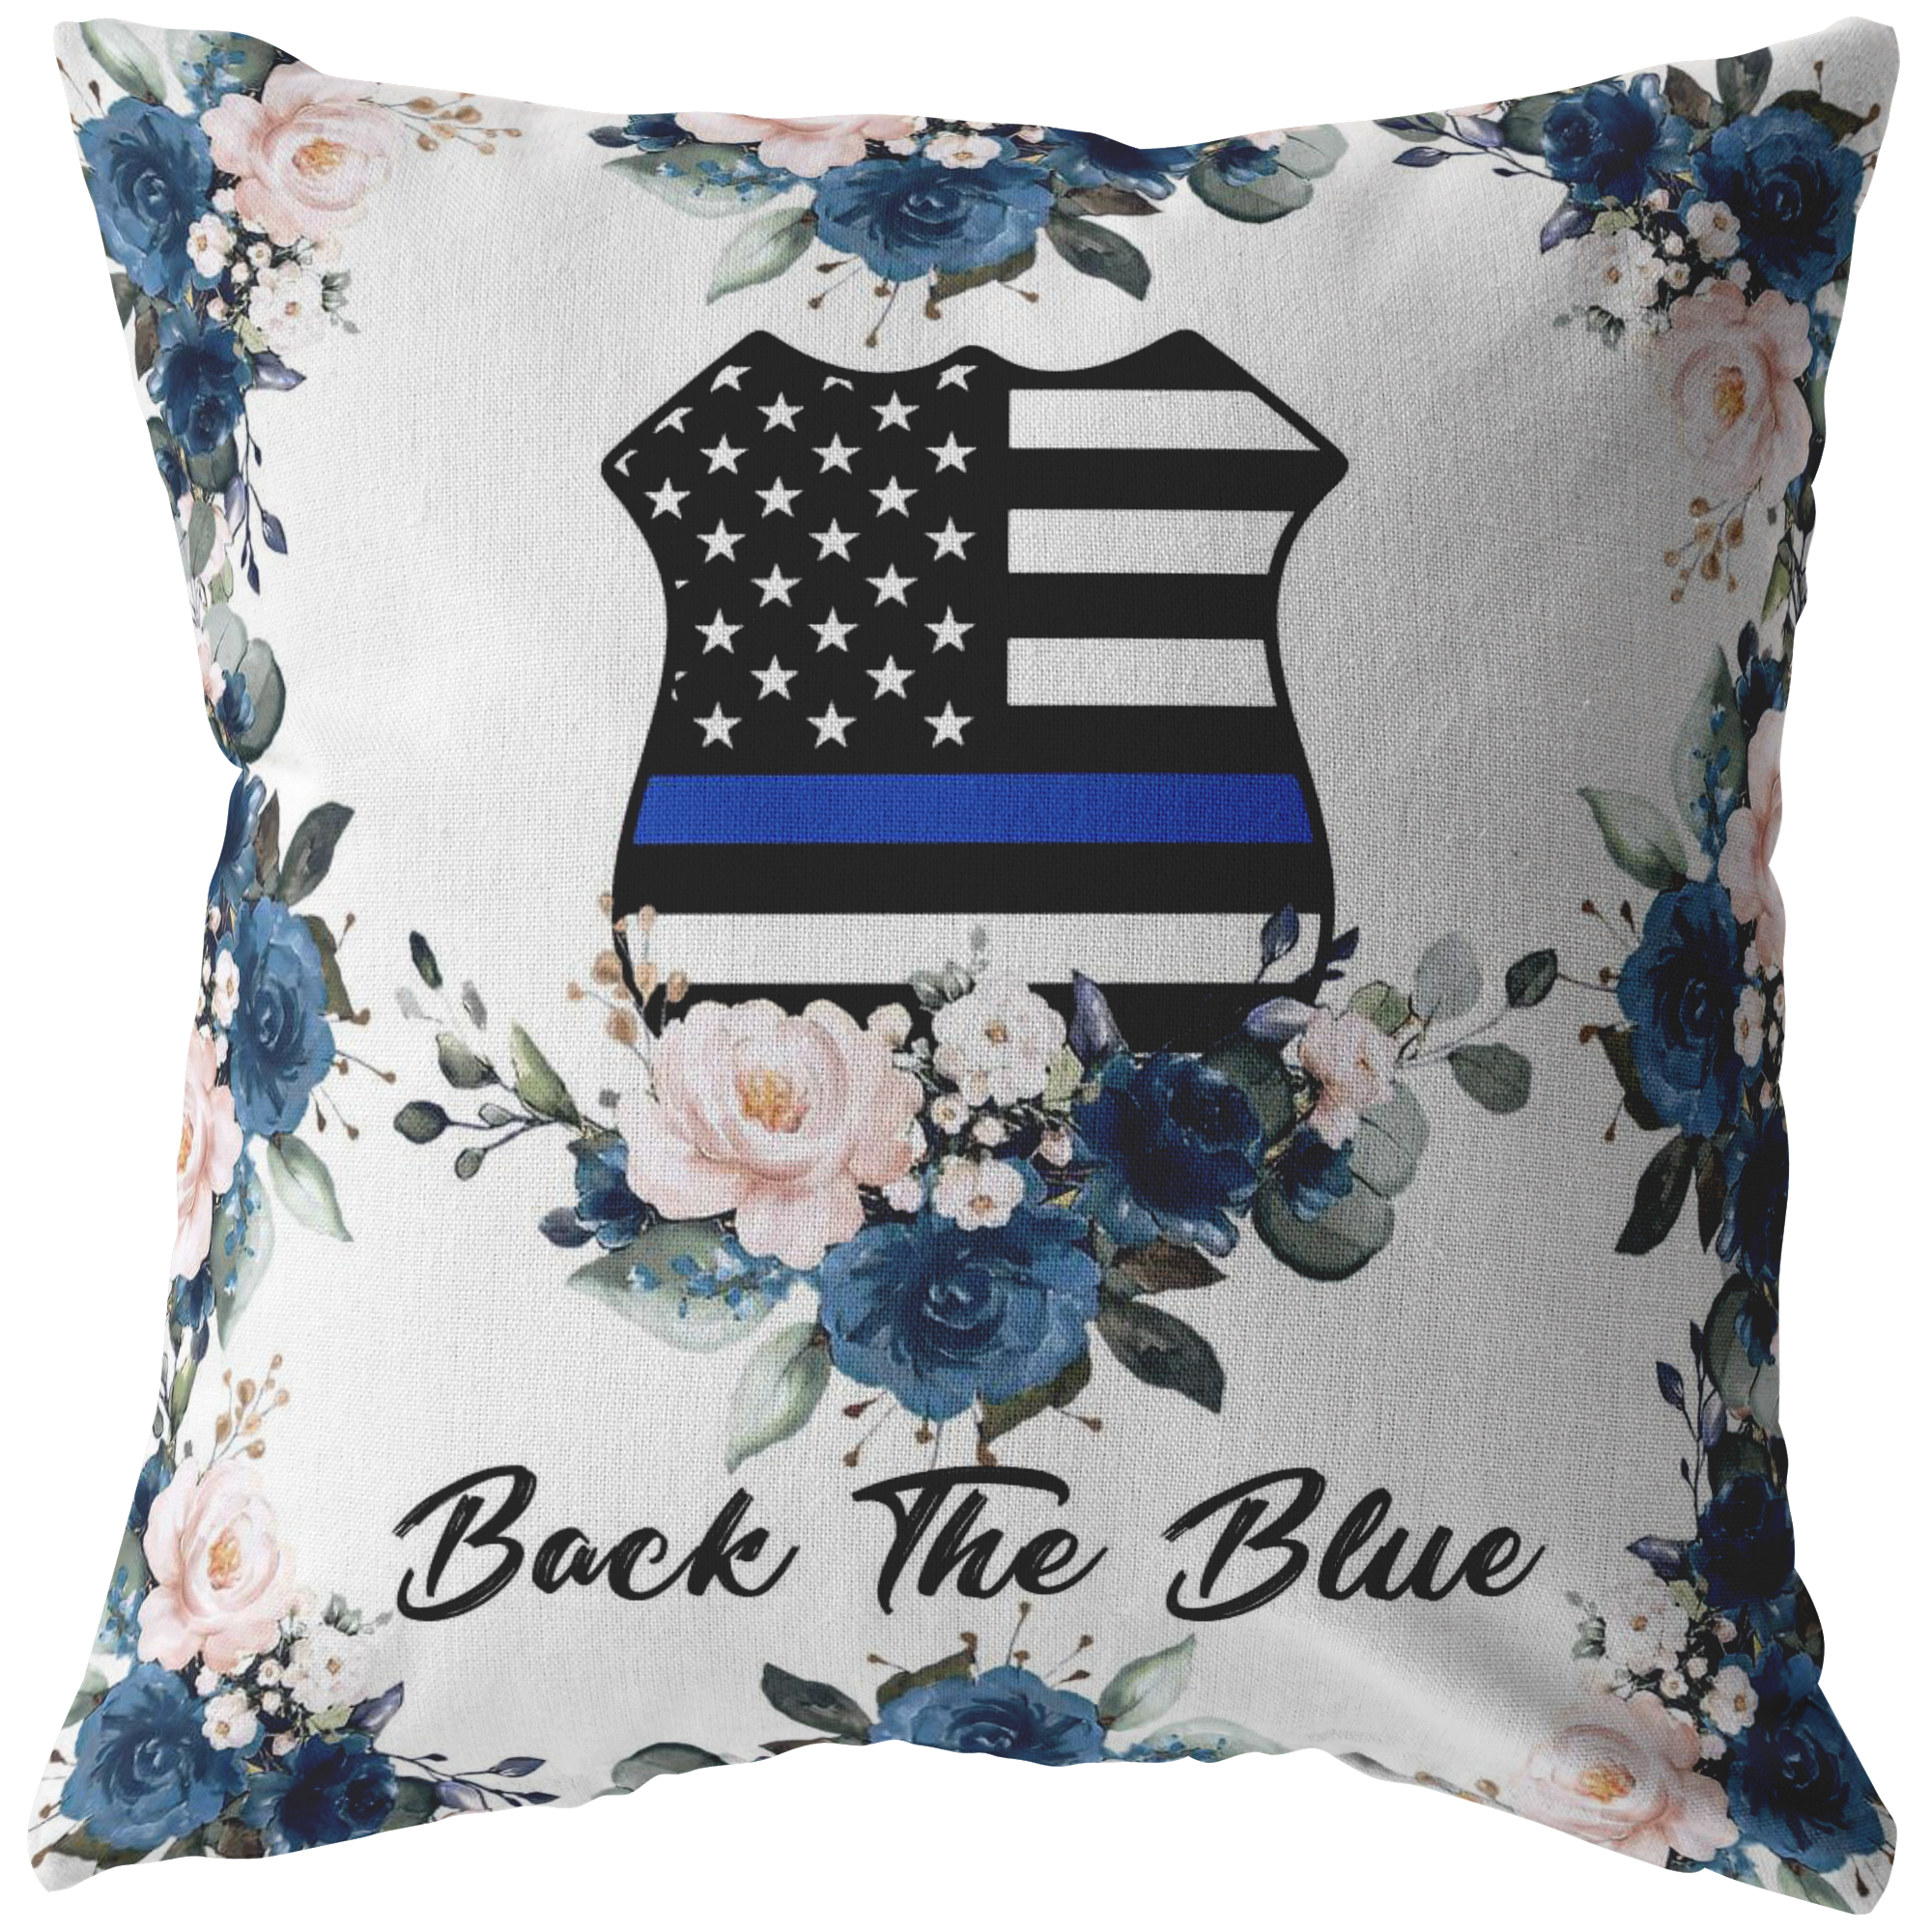 Back The Blue Pillow